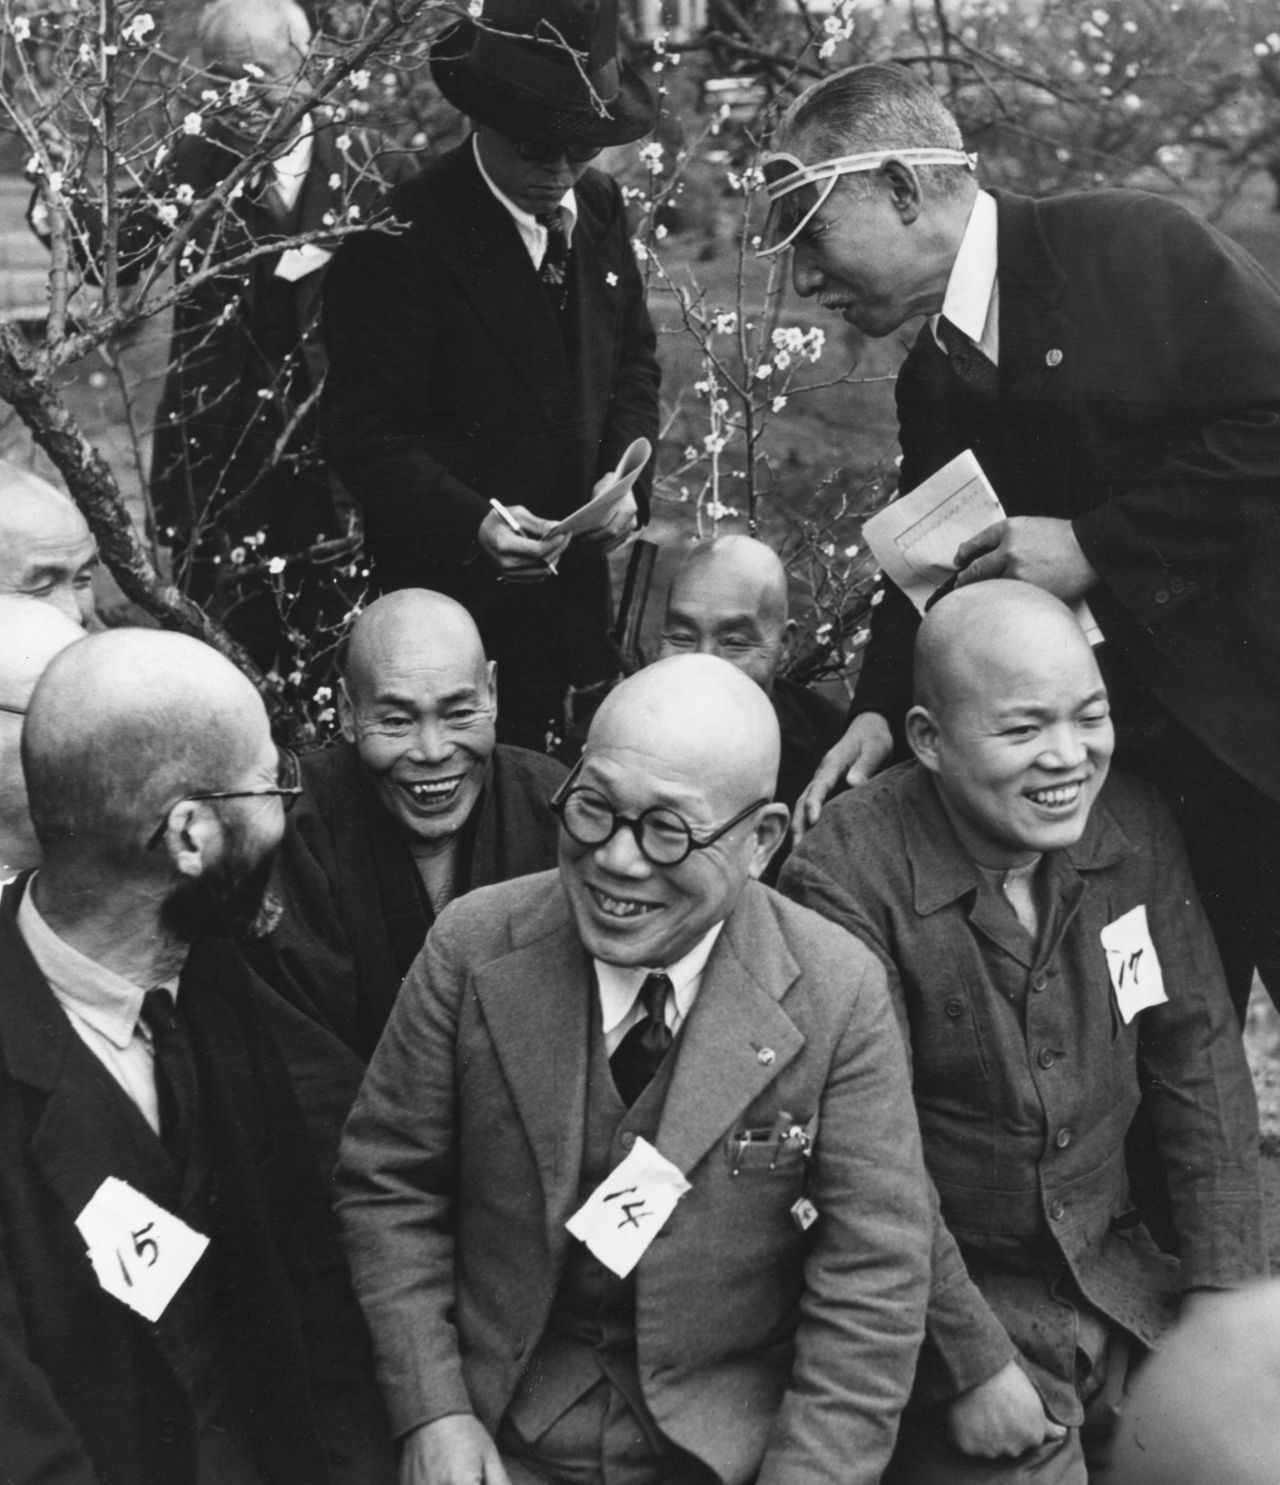 A judge examines finalists at a 1957 baldness competition in Japan, where rates of hair loss have historically been among the world's lowest.